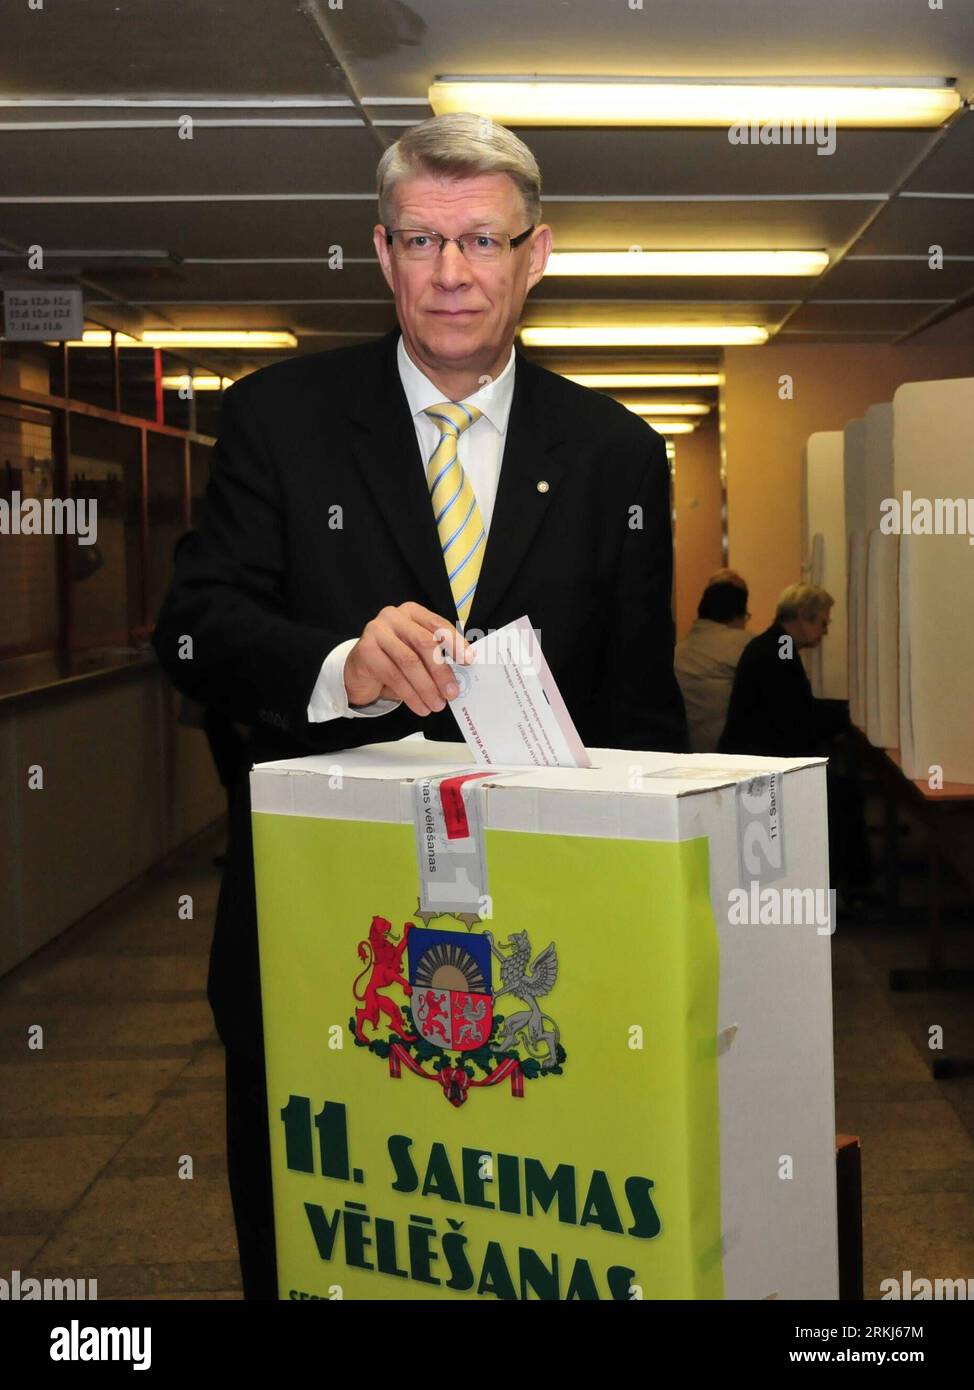 Bildnummer: 56011391  Datum: 17.09.2011  Copyright: imago/Xinhua (110917) -- RIGA, Sept. 17, 2011 (Xinhua) -- Former Latvian President Valdis Zatlers casts his ballot at a polling station in Riga, capital of Latvia, on Sept. 17, 2011. Latvians headed to polling stations Saturday as the baltic country held a snap election three months after the 100-seat parliament was dissolved. (Xinhua/Guo Qun) (lr) LATVIA-RIGA-PARLIAMENT-ELECTION PUBLICATIONxNOTxINxCHN People Politik premiumd xda x0x 2011 hoch      56011391 Date 17 09 2011 Copyright Imago XINHUA  Riga Sept 17 2011 XINHUA Former Latvian Presid Stock Photo